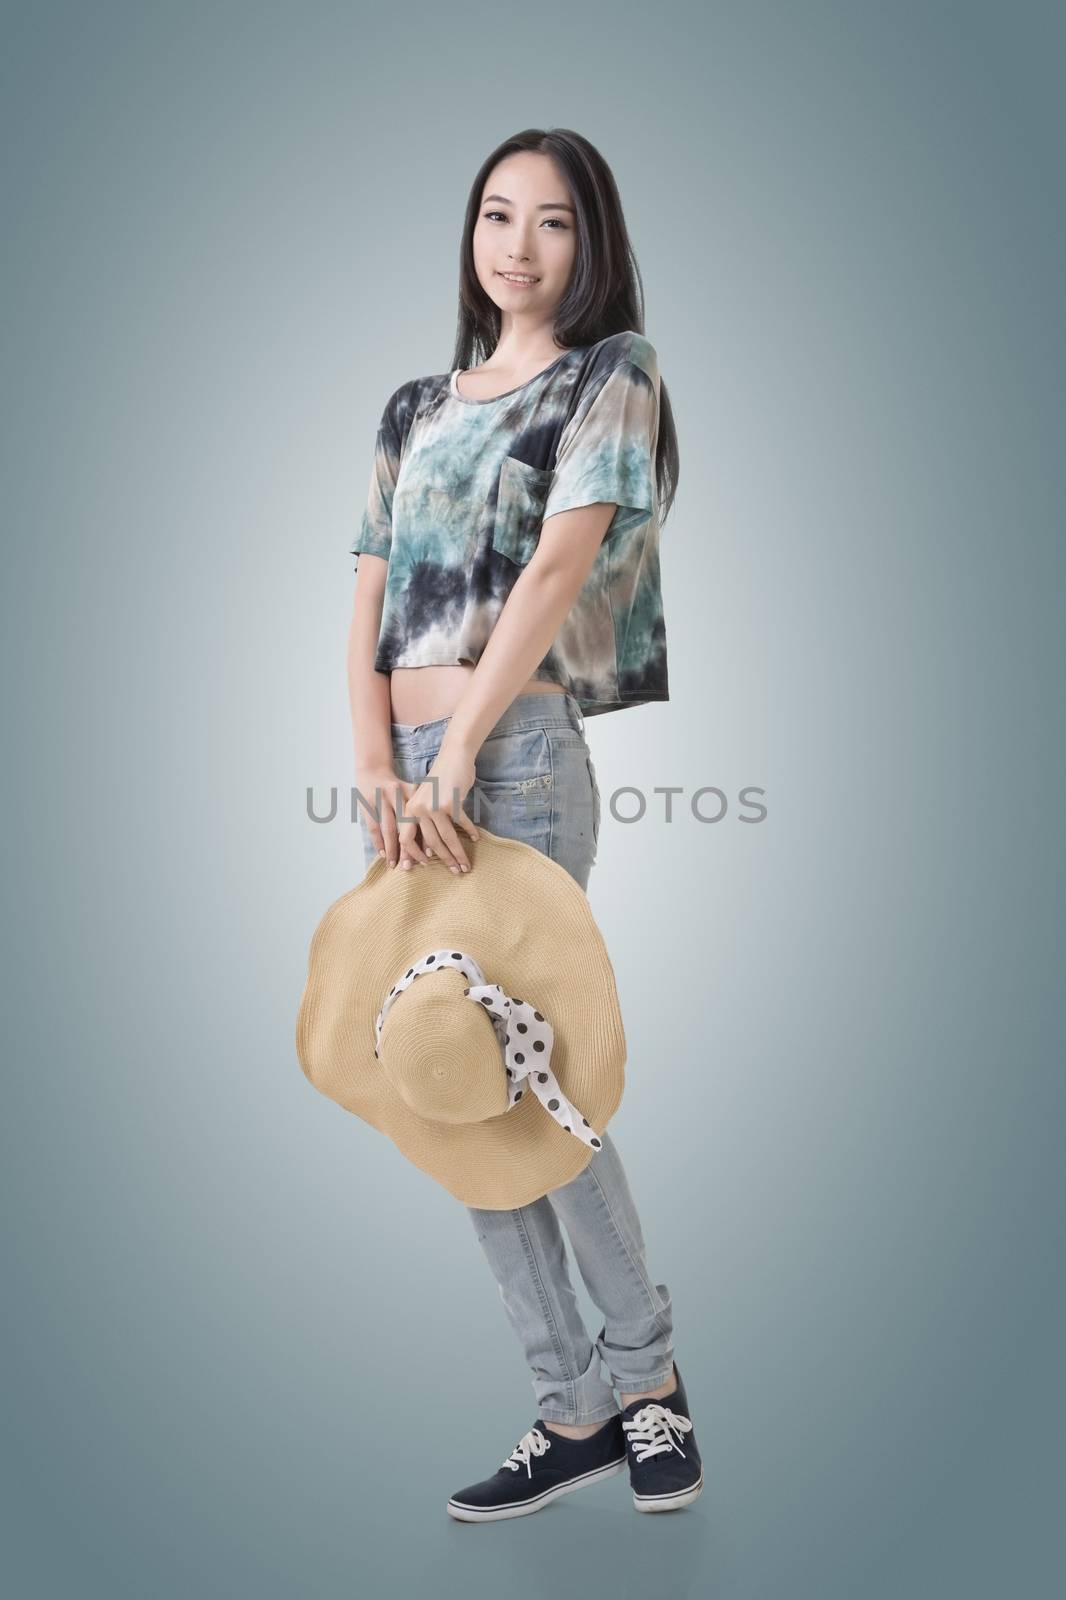 Asian beauty with hat, full length portrait isolated with clipping path.